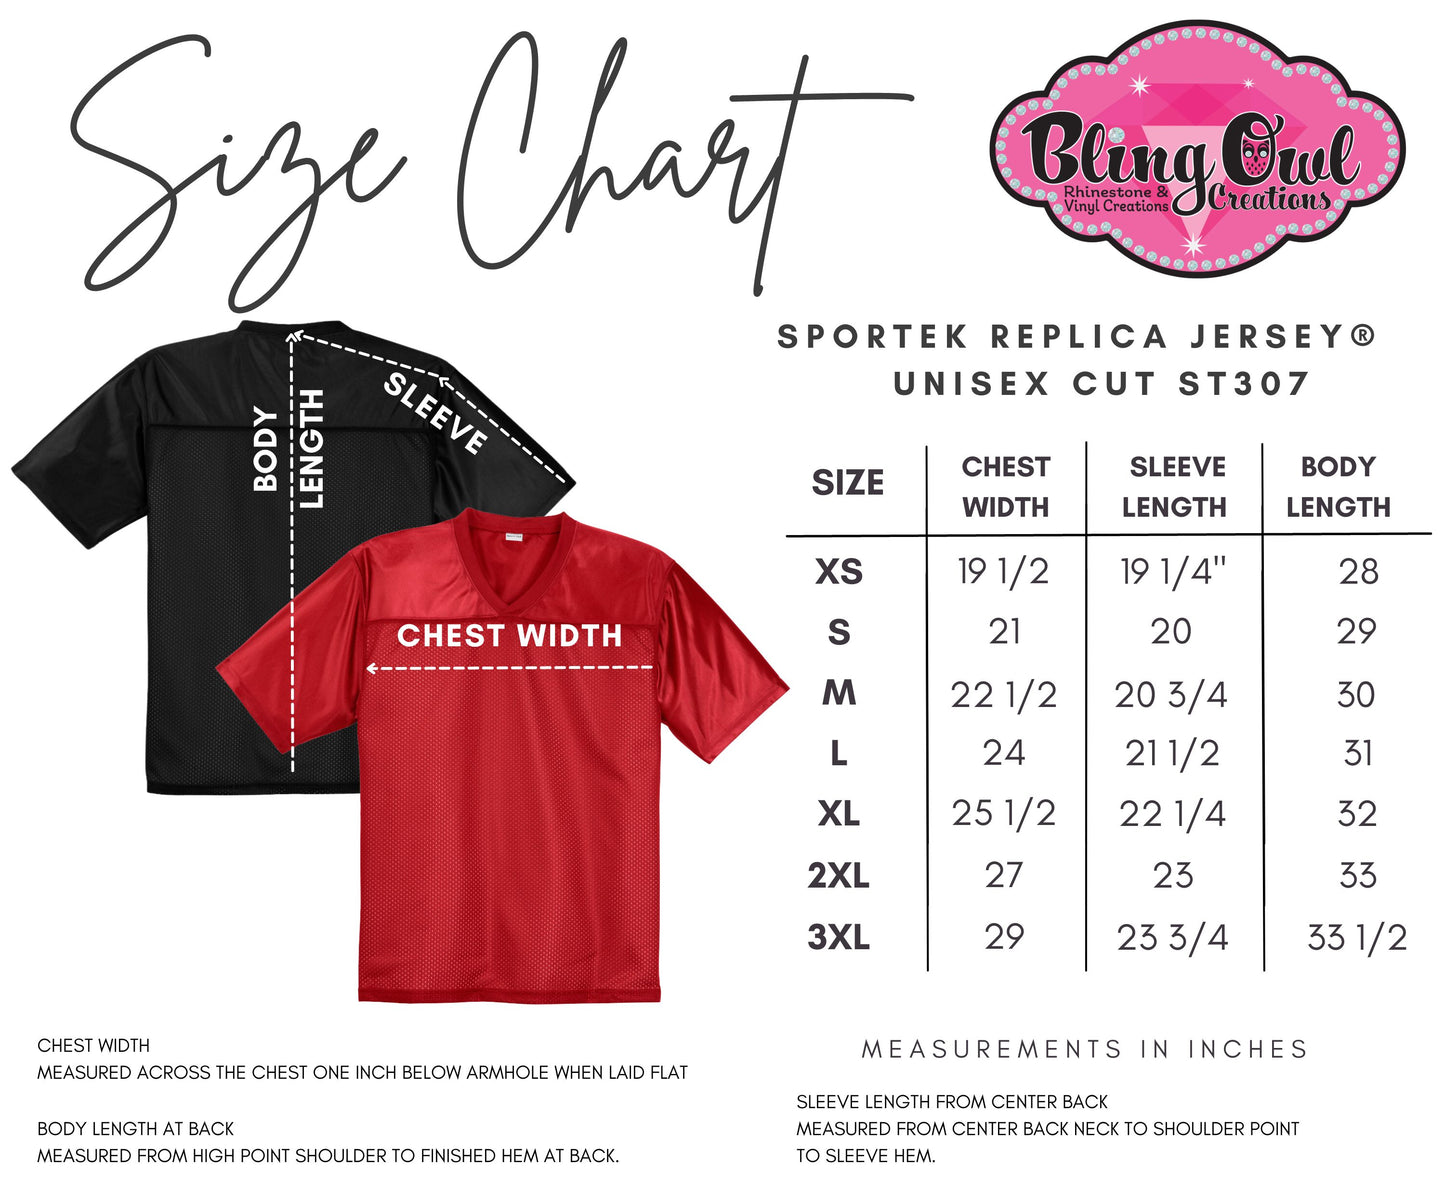 Curve Cheer Bow Football Jersey